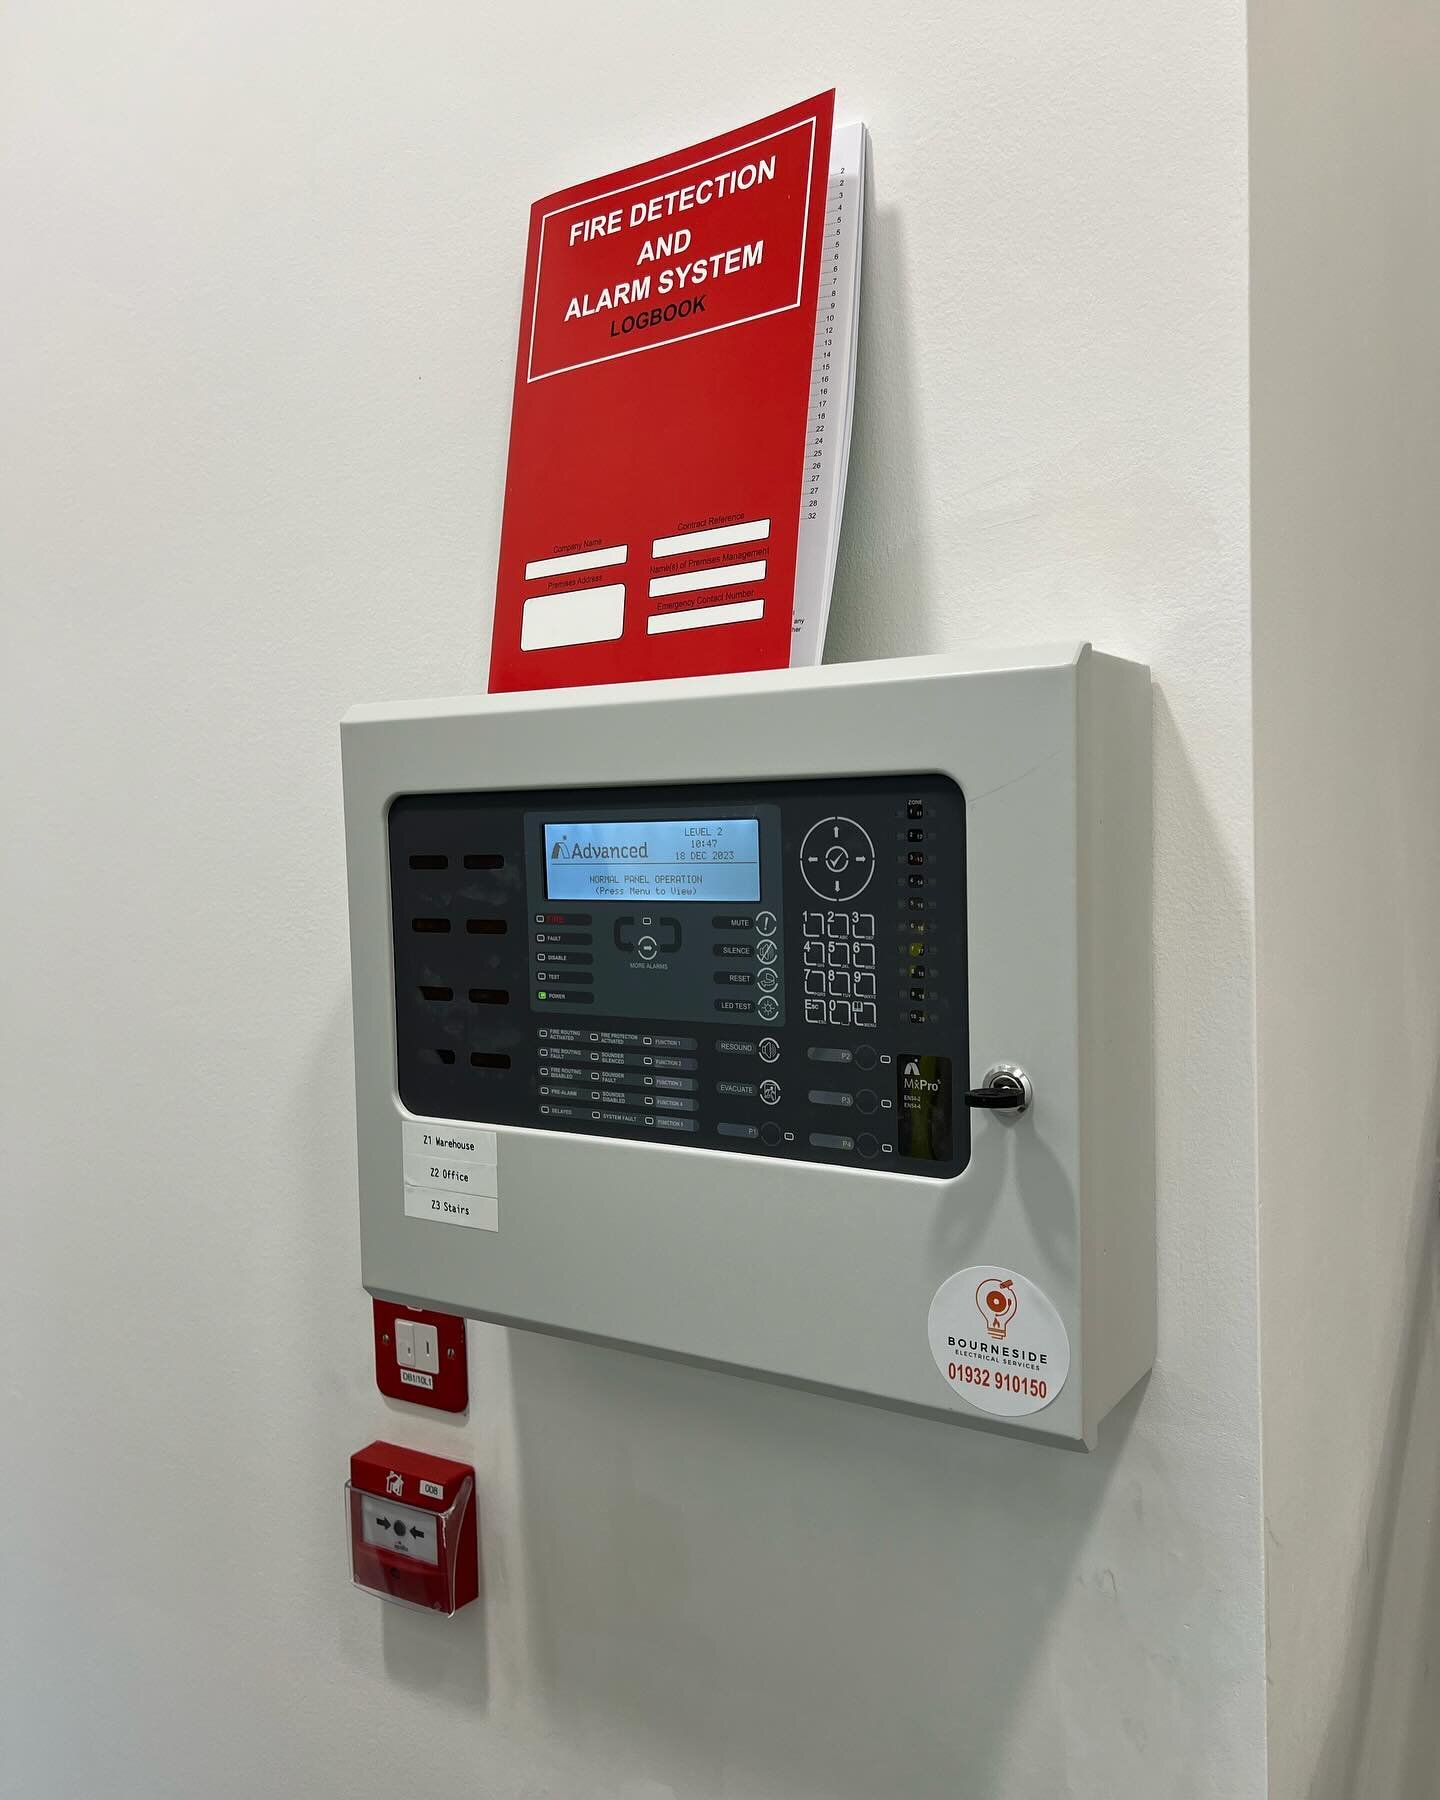 Our resident fire alarm engineer @lewis__green94 with a nice tidy install on 3 warehouses recently over in Hemel Hempstead 🔥 

Thanks for the work and a perfect first fix  @lapsley_electrical 👏🏽 

#firealarm #firealarmengineer #firesystem #lifesaf